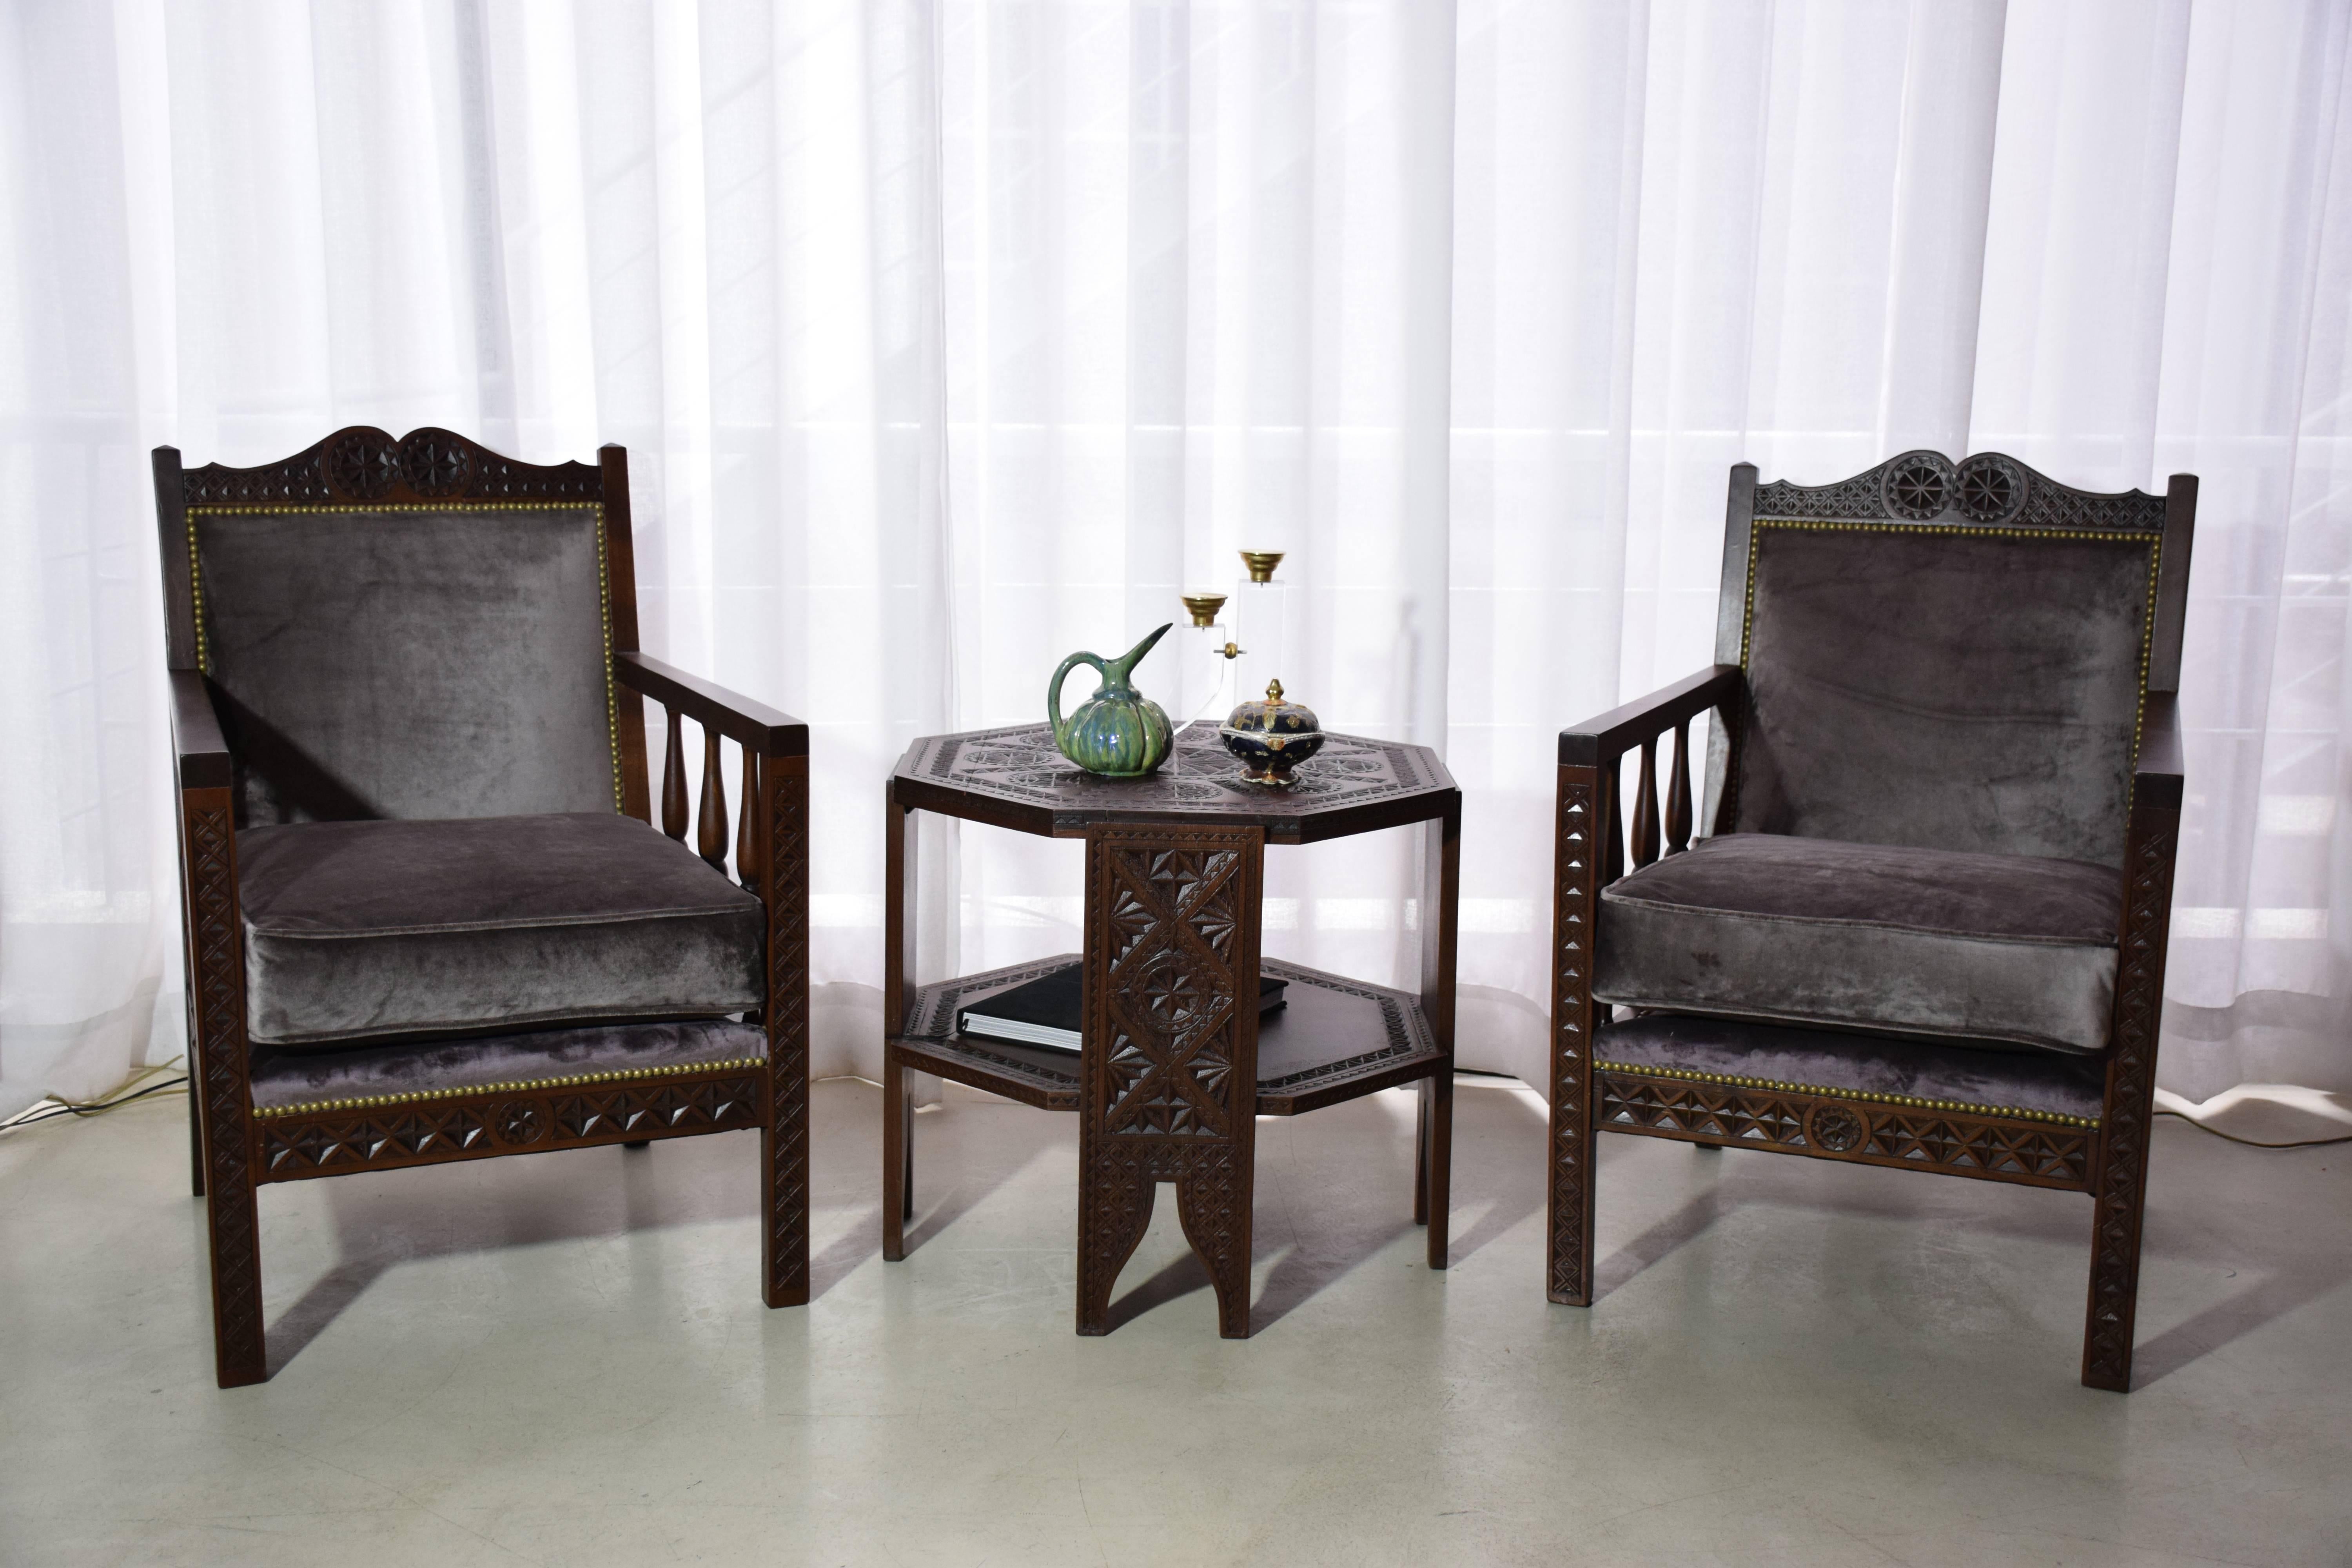 A 20th century vintage set of four Moorish armchairs and corresponding coffee table by Jules Grosso's French manufacturing company, circa 1930s. The pieces are composed of intricately hand-carved mahogany and beechwood. Fully restored through new